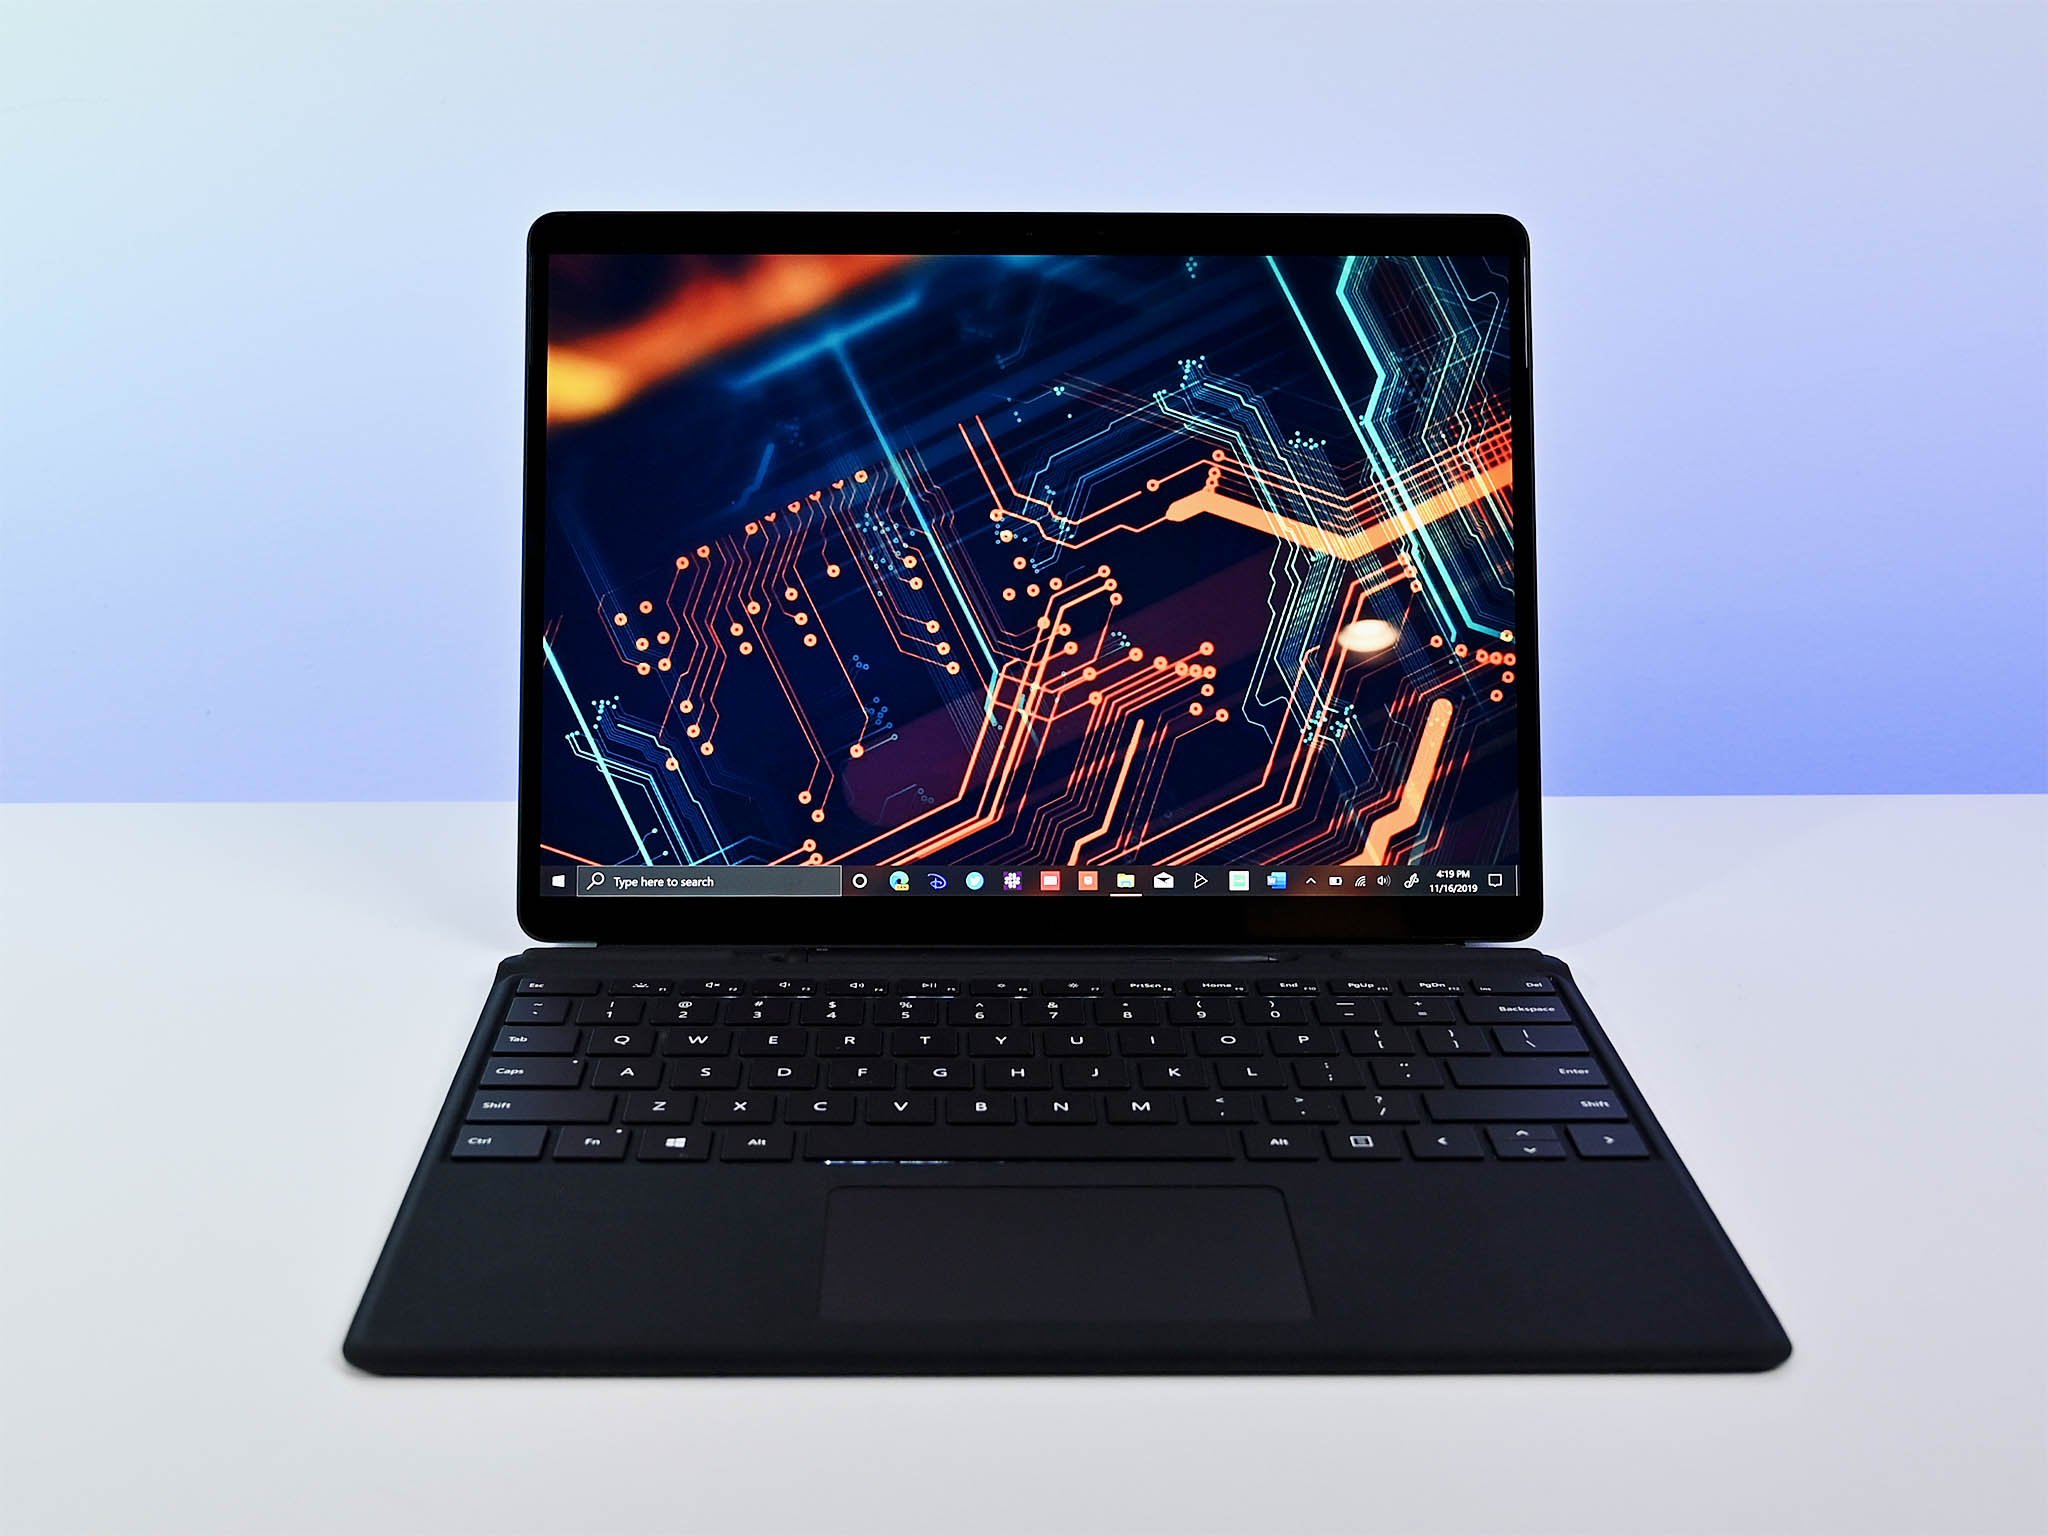 https://www.windowscentral.com/sites/wpcentral.com/files/styles/large_wm_brb/public/field/image/2019/11/surface-pro-x-hero-front.jpg?itok=ly26zJbV